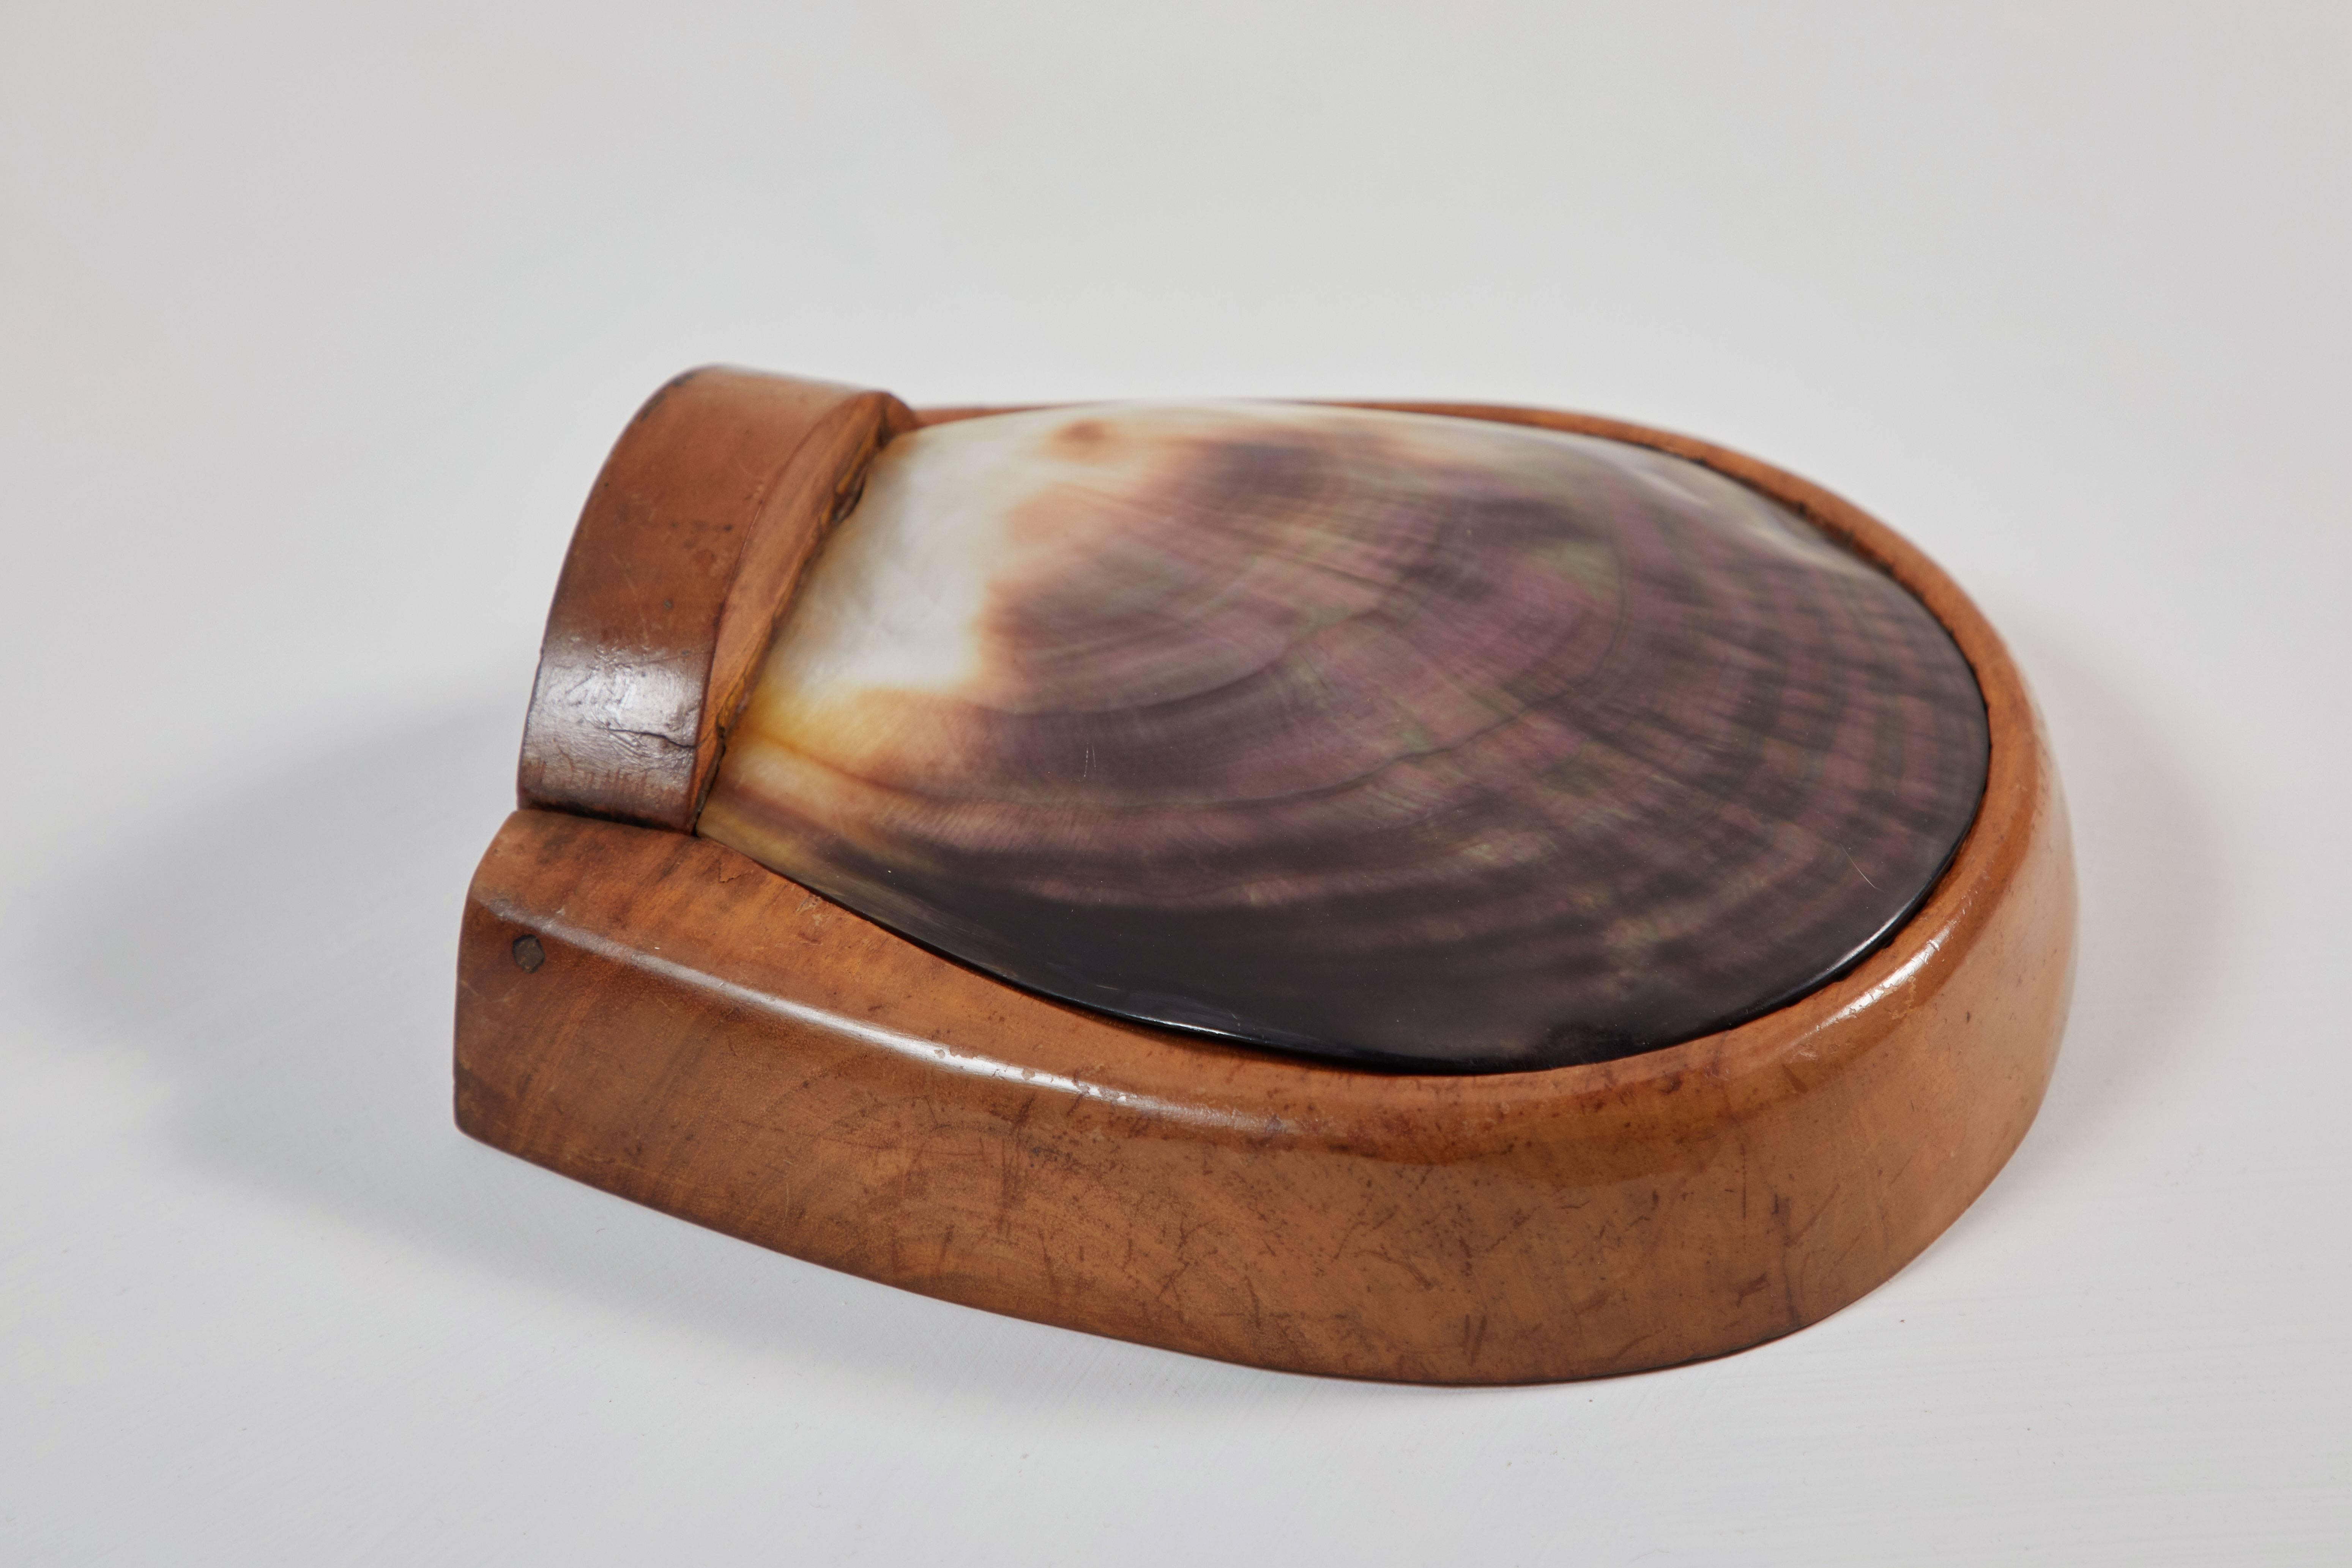 Carved Abalone Shell Box Attributed to Alexandre Noll